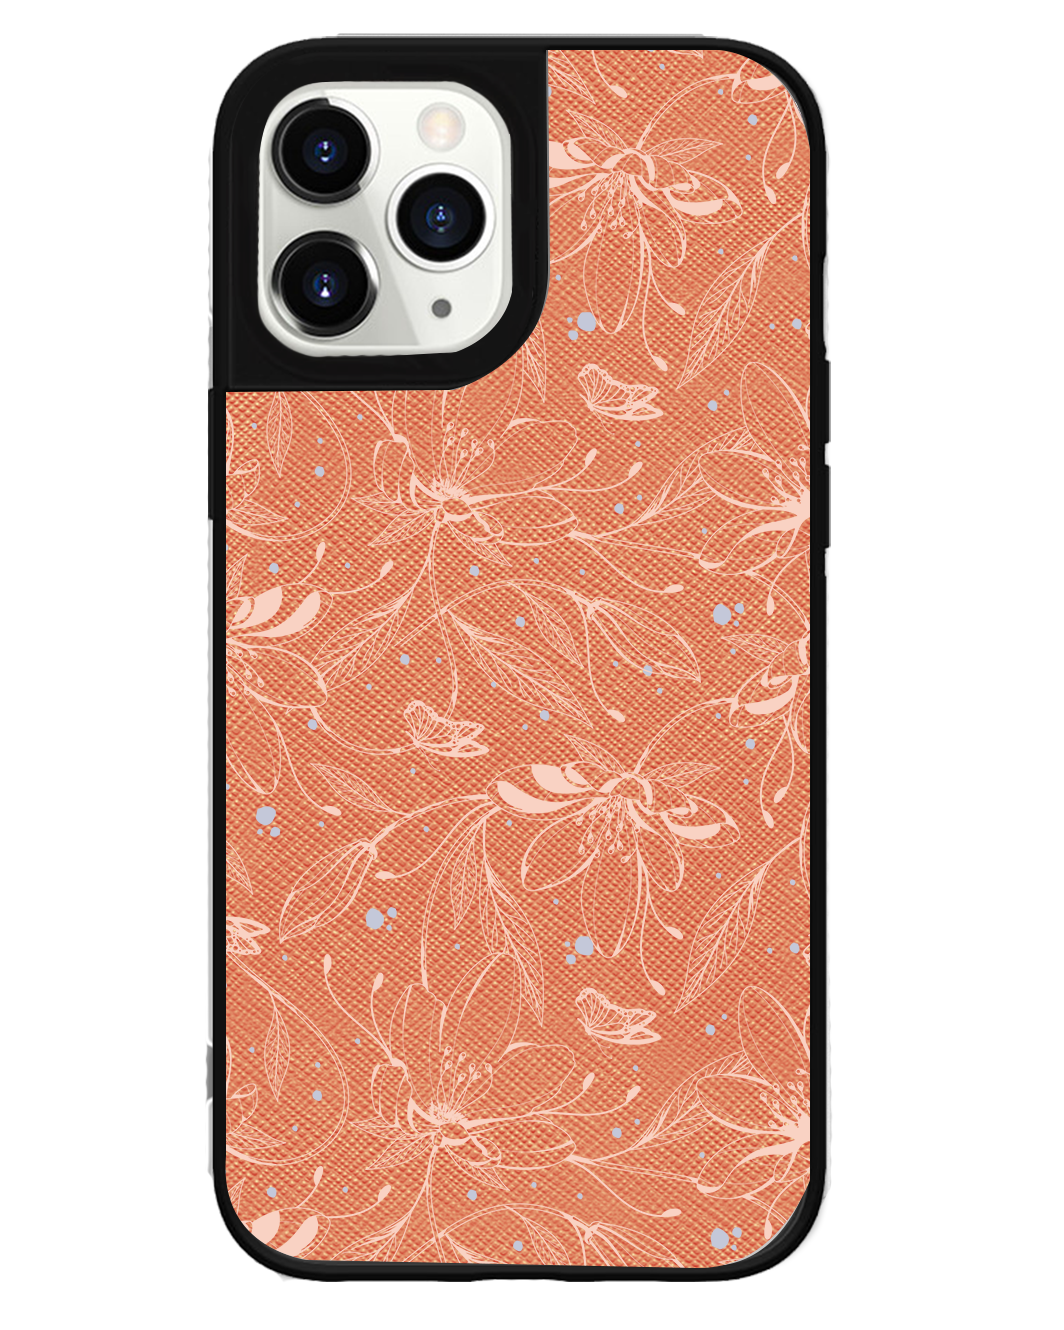 iPhone Leather Grip Case - Sketchy Flower & Butterfly 1.0